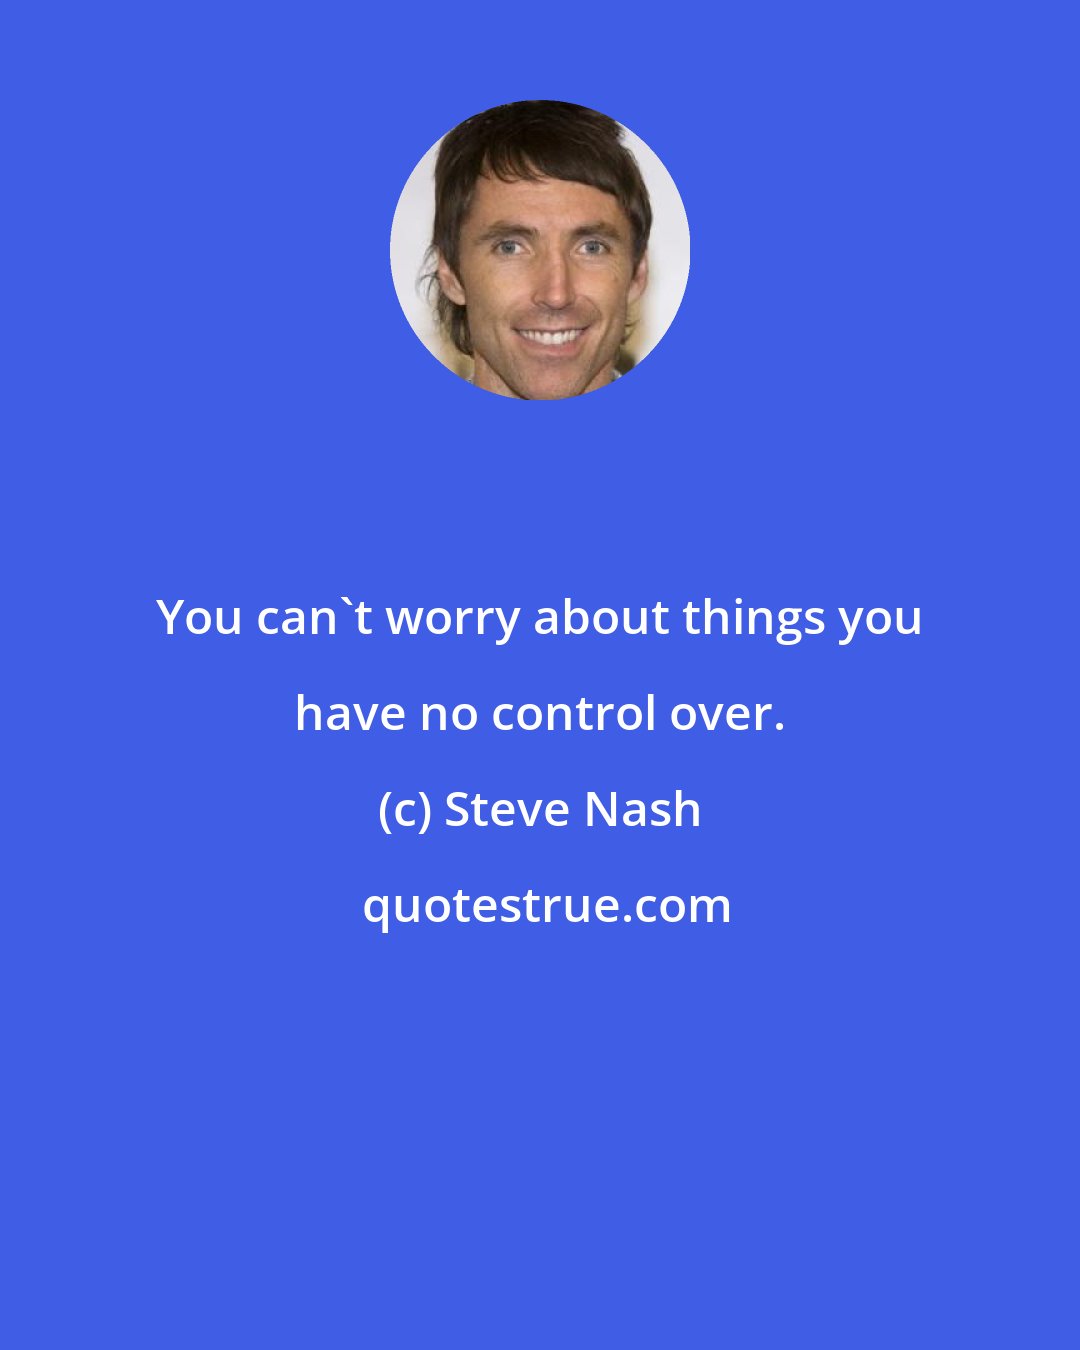 Steve Nash: You can't worry about things you have no control over.